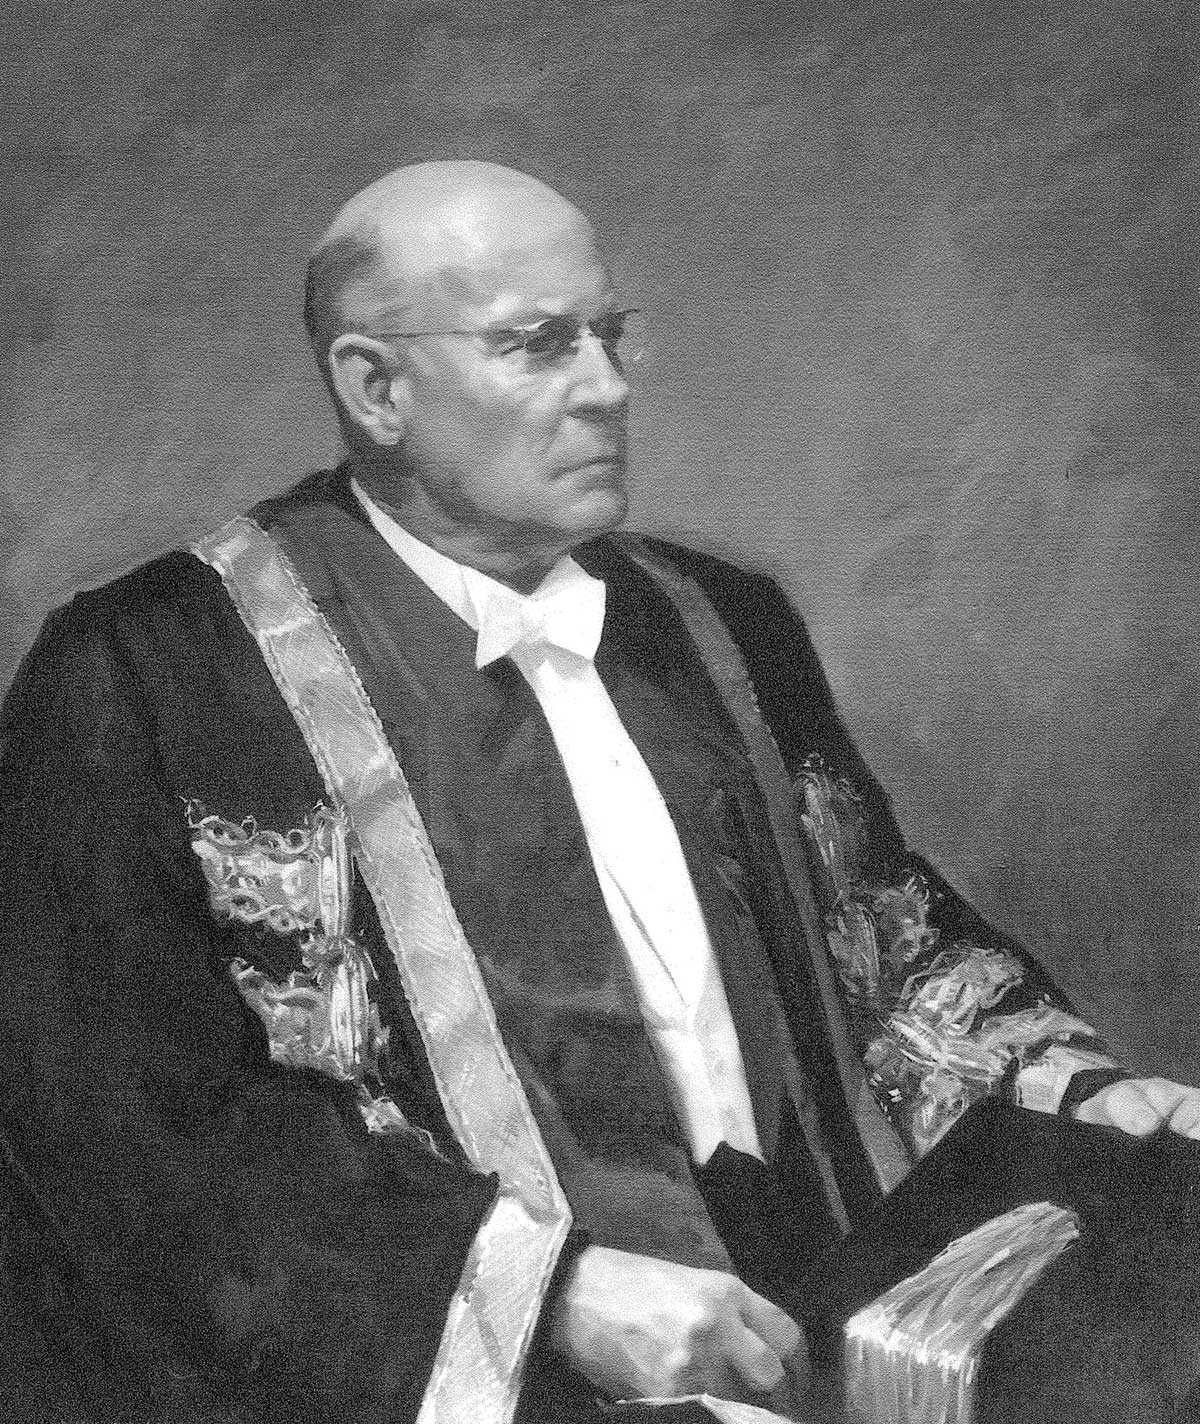 Painting of Alan Holmes a Court in robes